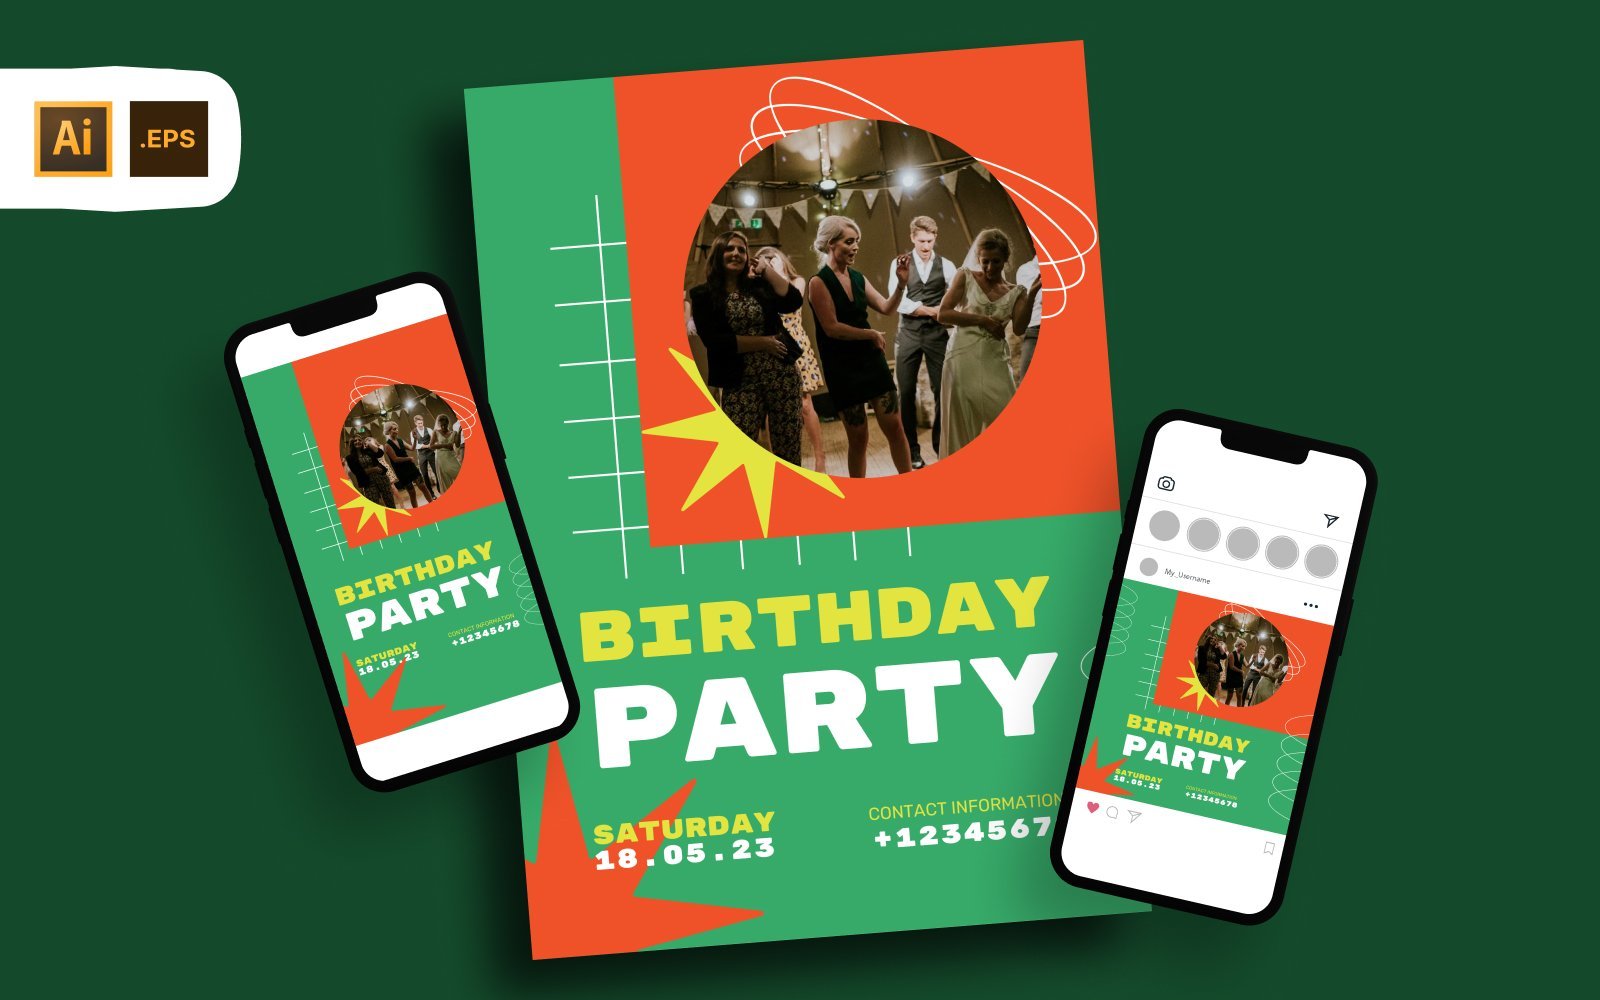 Template #367480 Birthday Party Webdesign Template - Logo template Preview